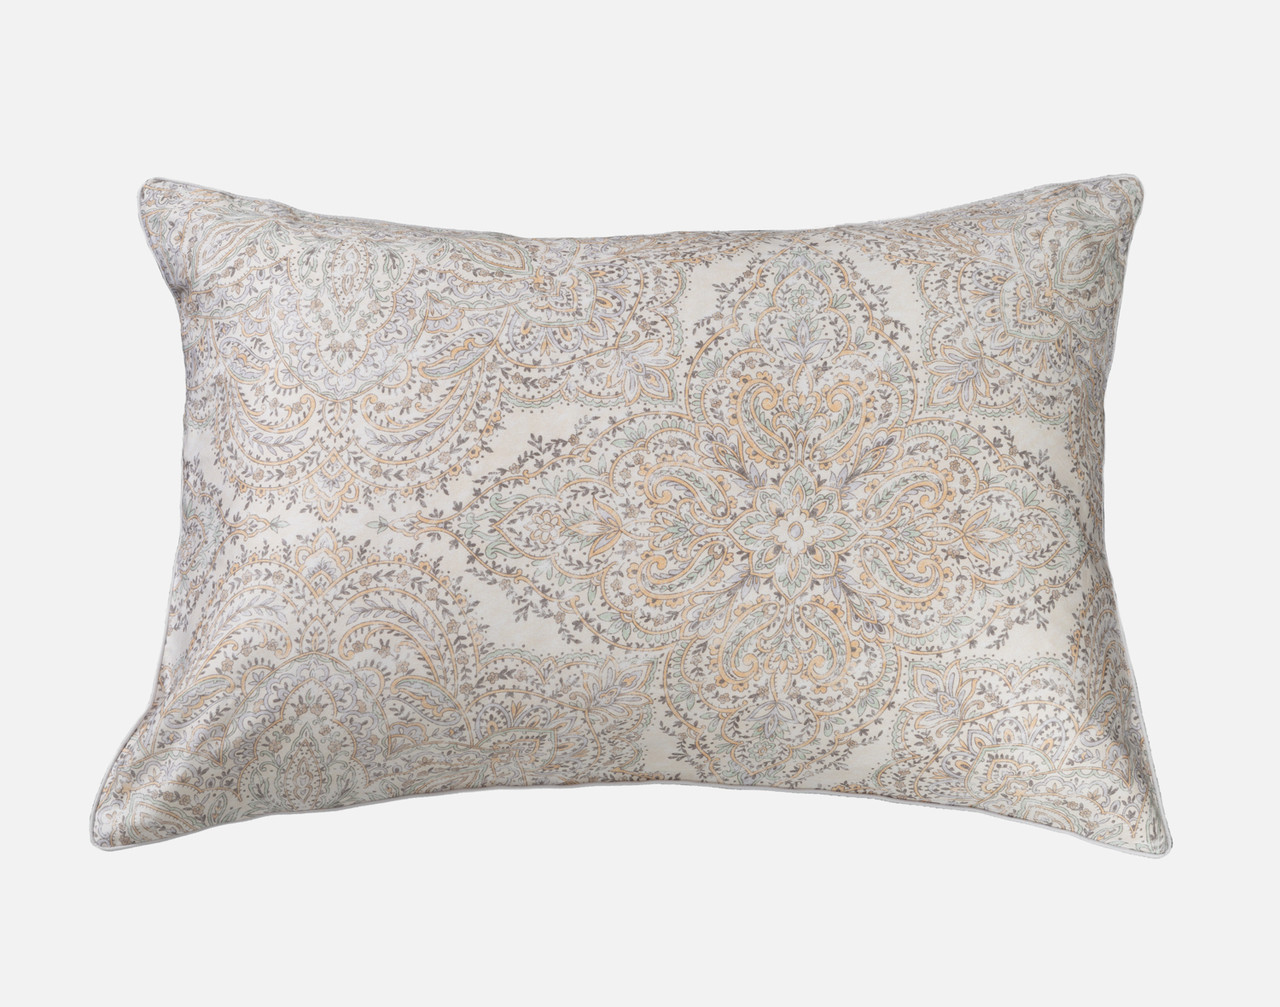 Front view of our Bombay Pillow Sham with coordinating medallion design sitting against a solid white background.